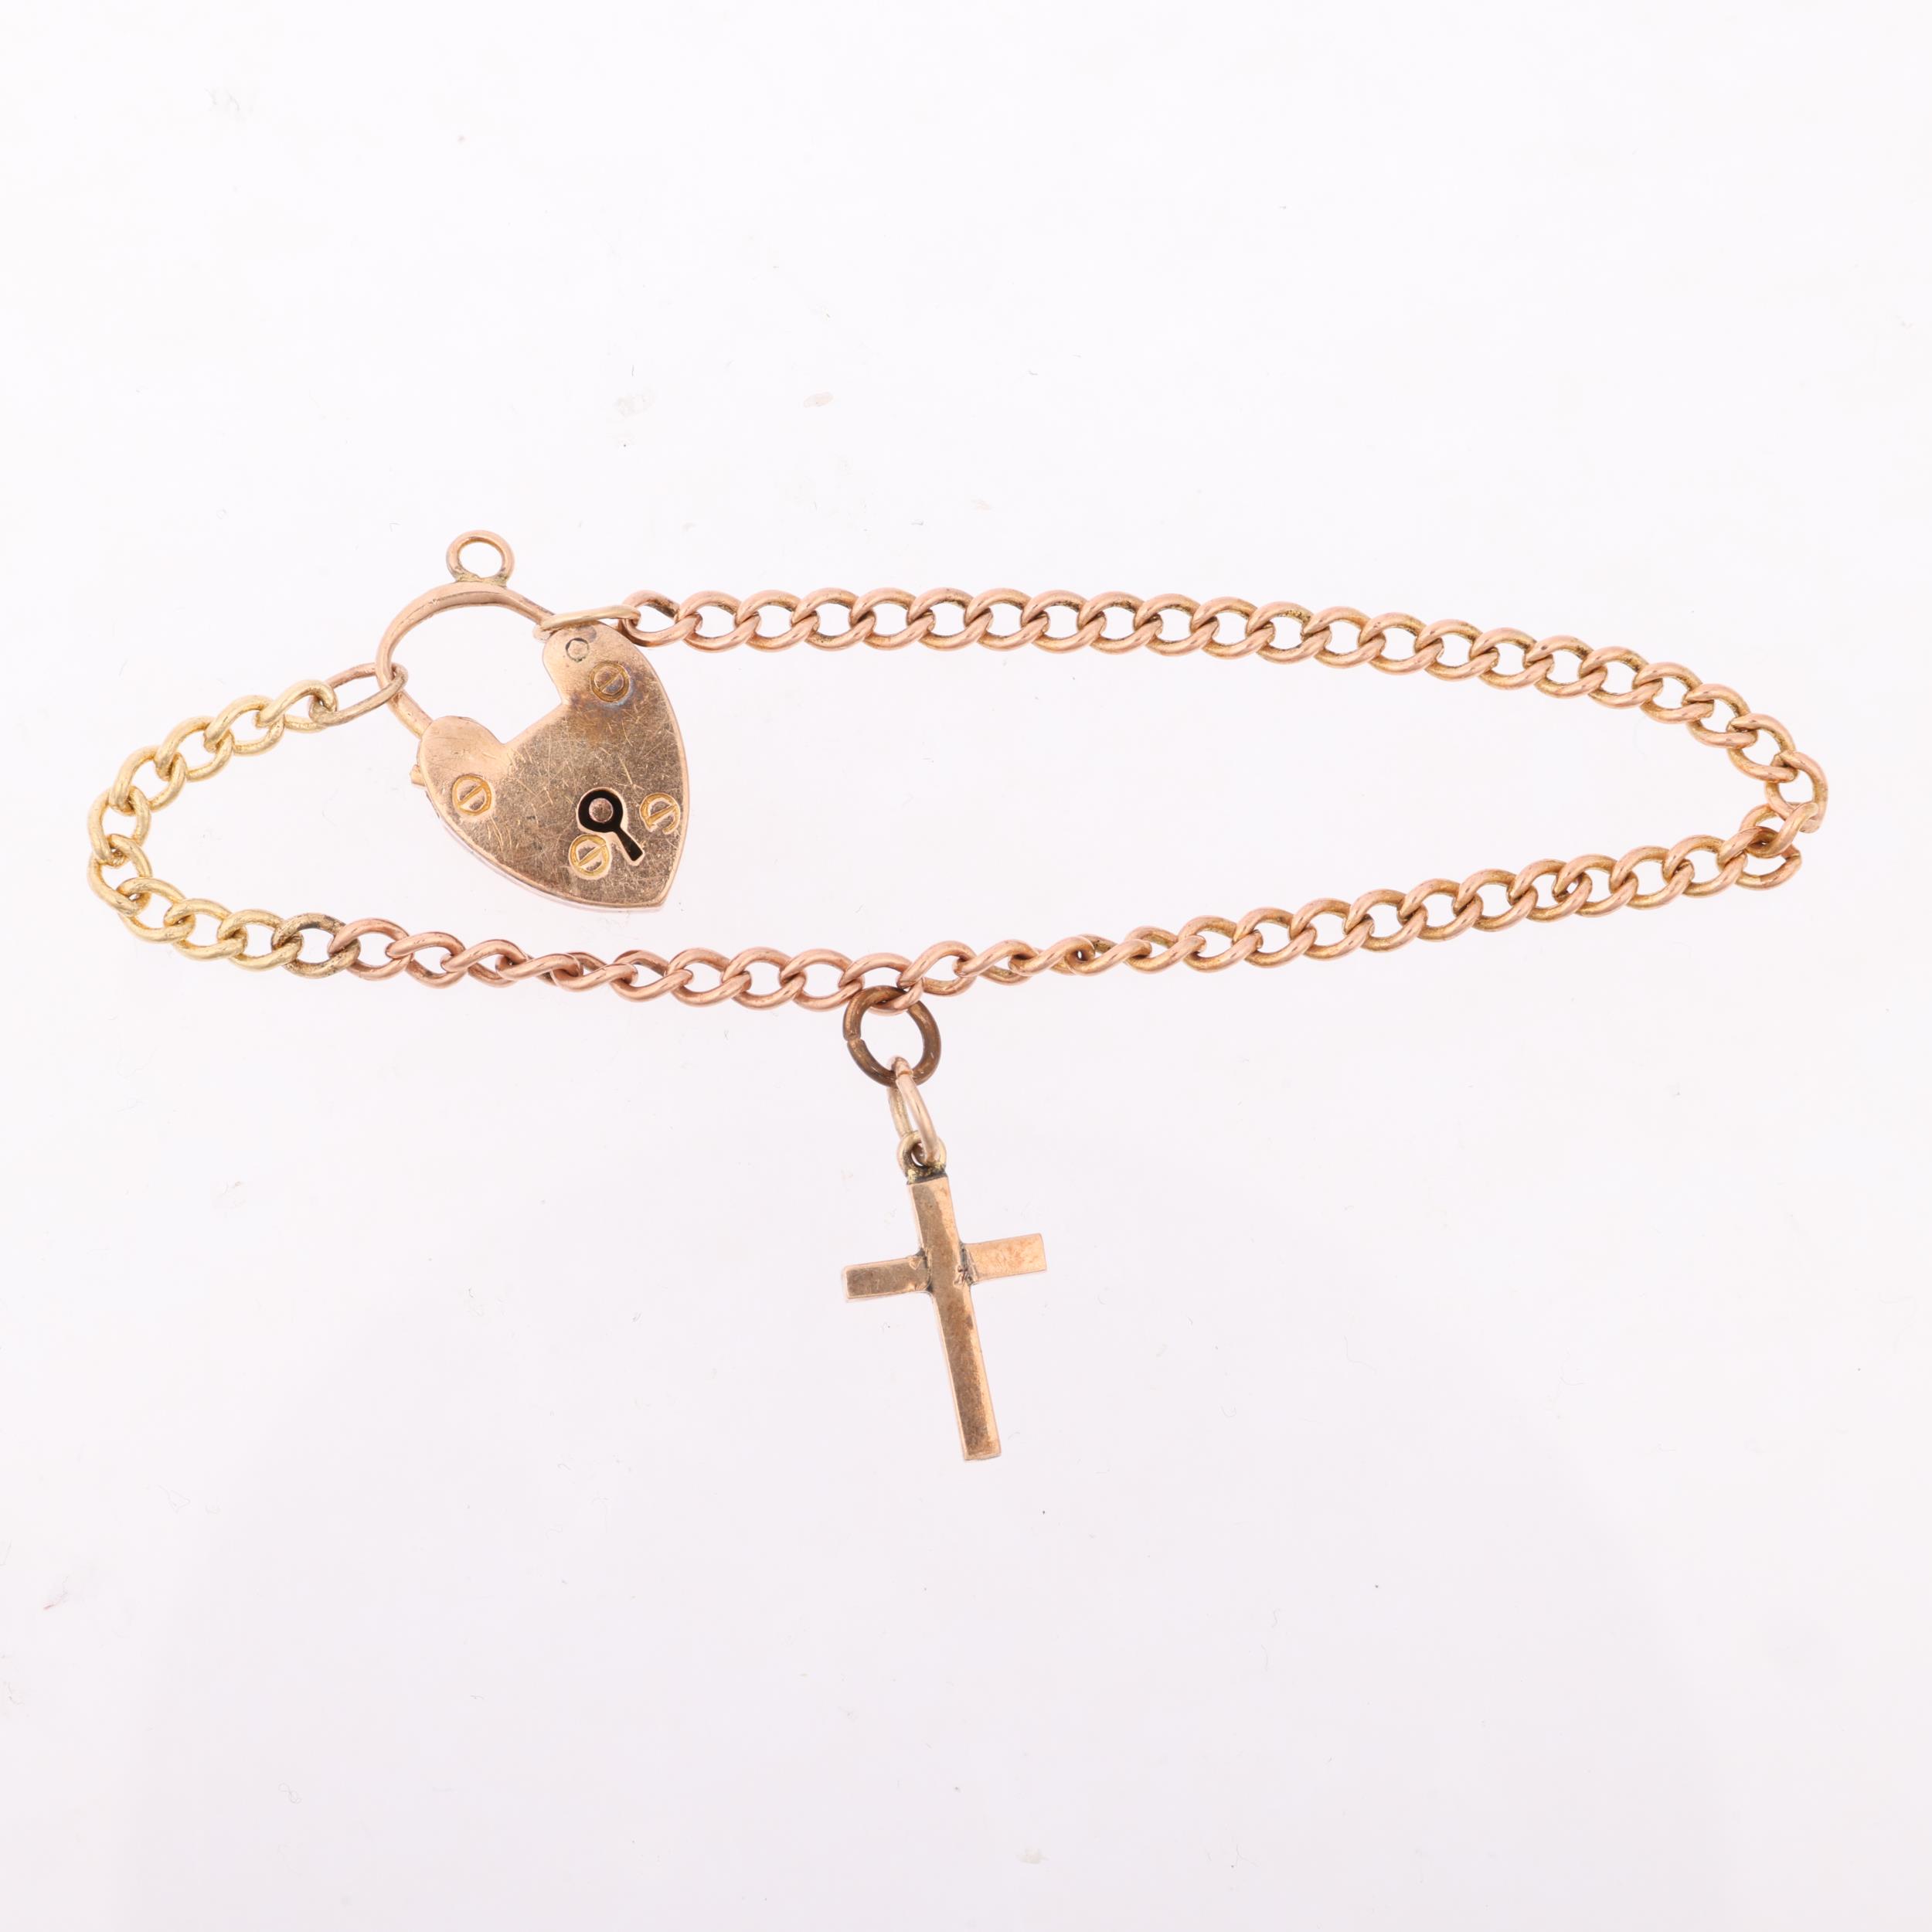 An early 20th century 9ct gold curb link chain bracelet, with unmarked gold cross charm and 9ct